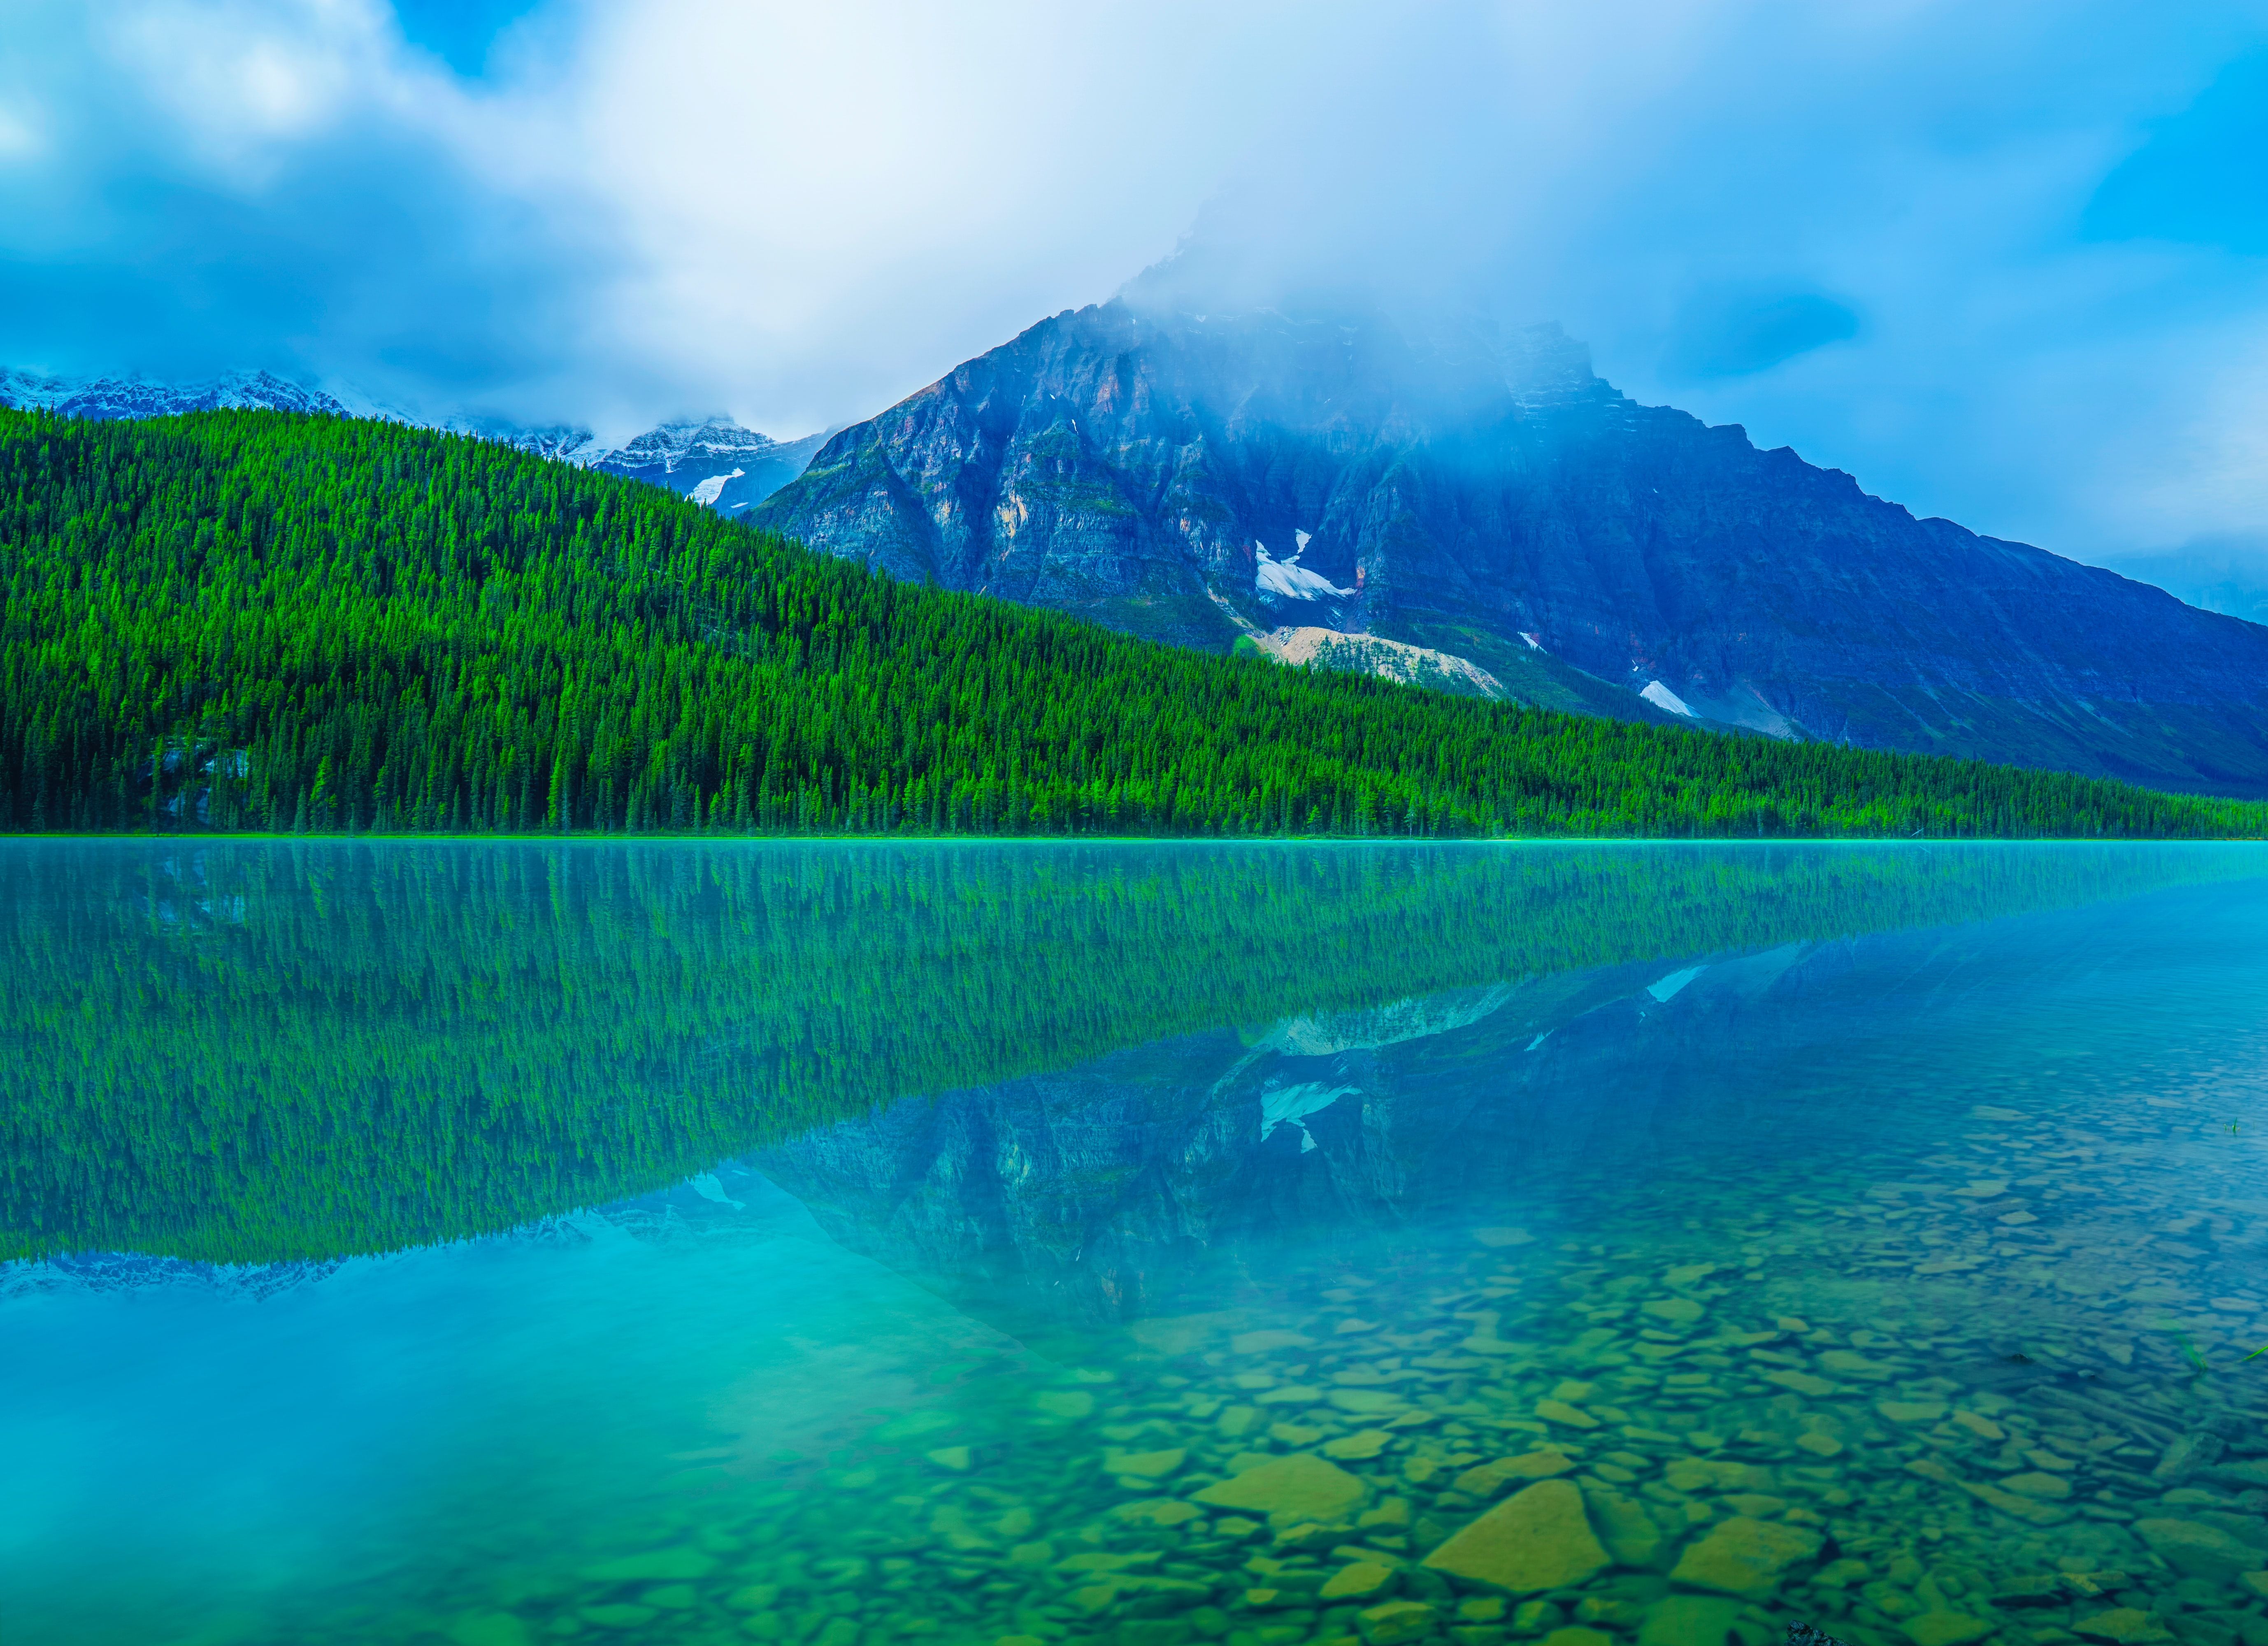 green water reflecting a mountain with clouds